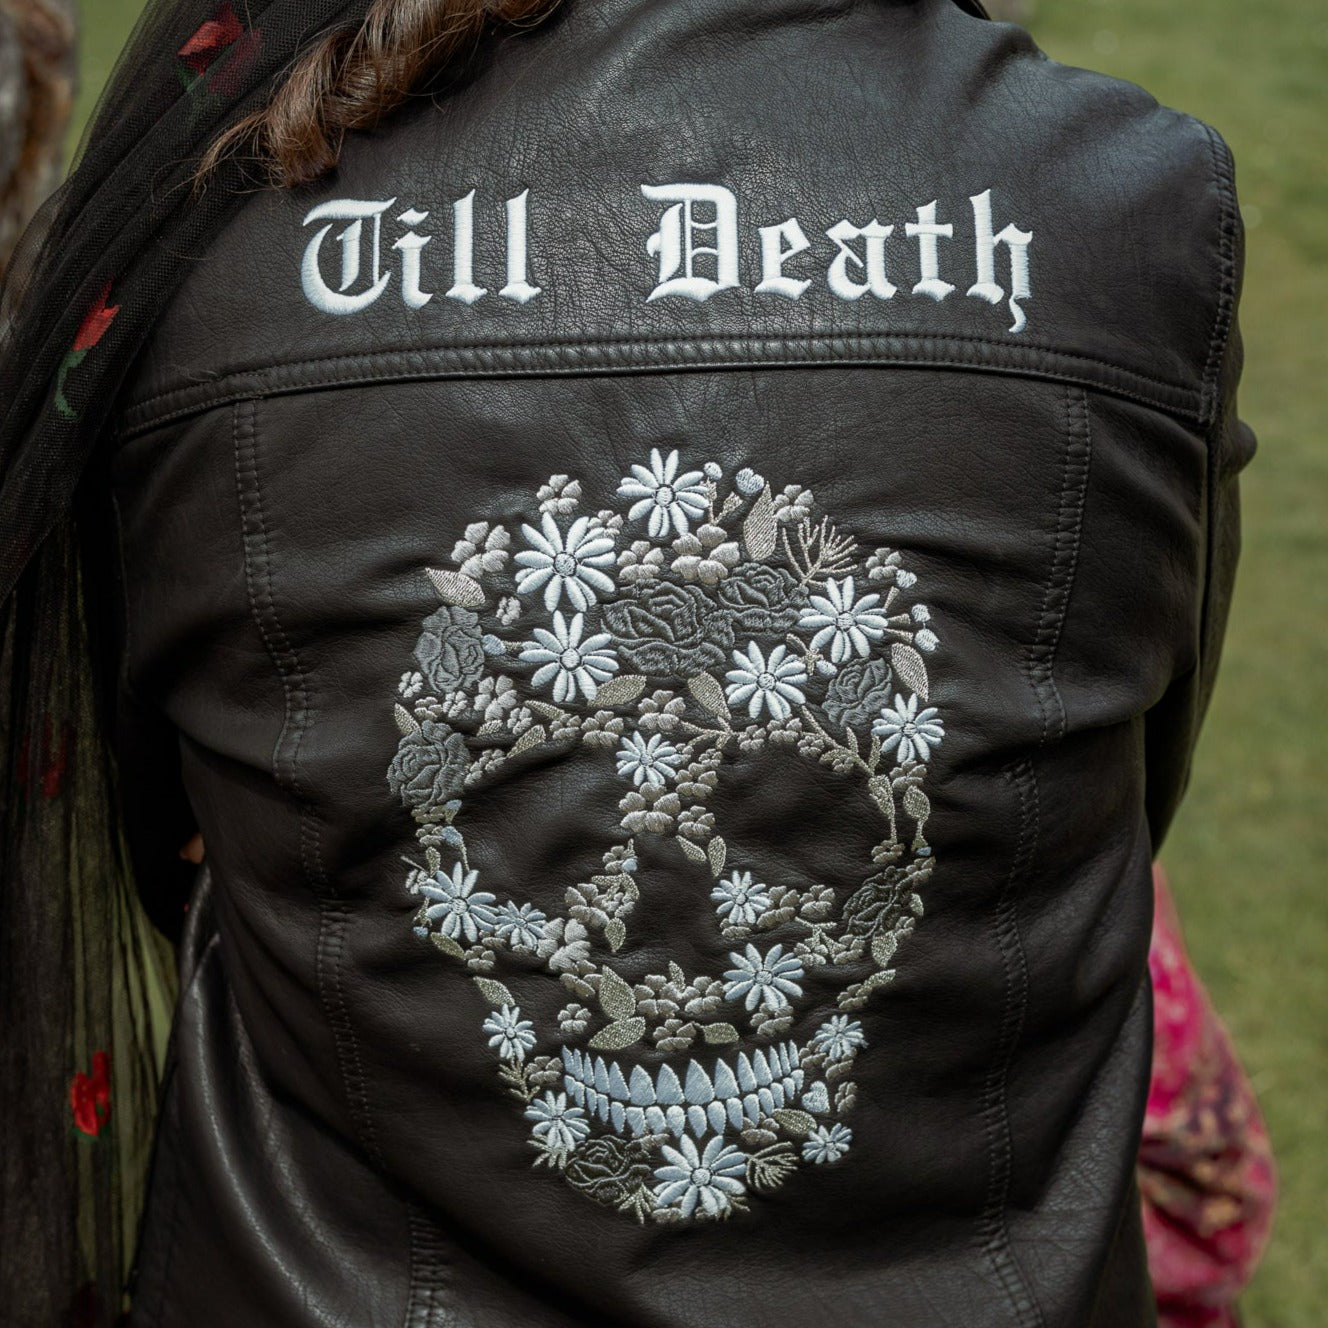 Black leather bridal jacket featuring a Floral Skull Till Death Bride – a chic and unique cover-up for the bold and rebellious bride